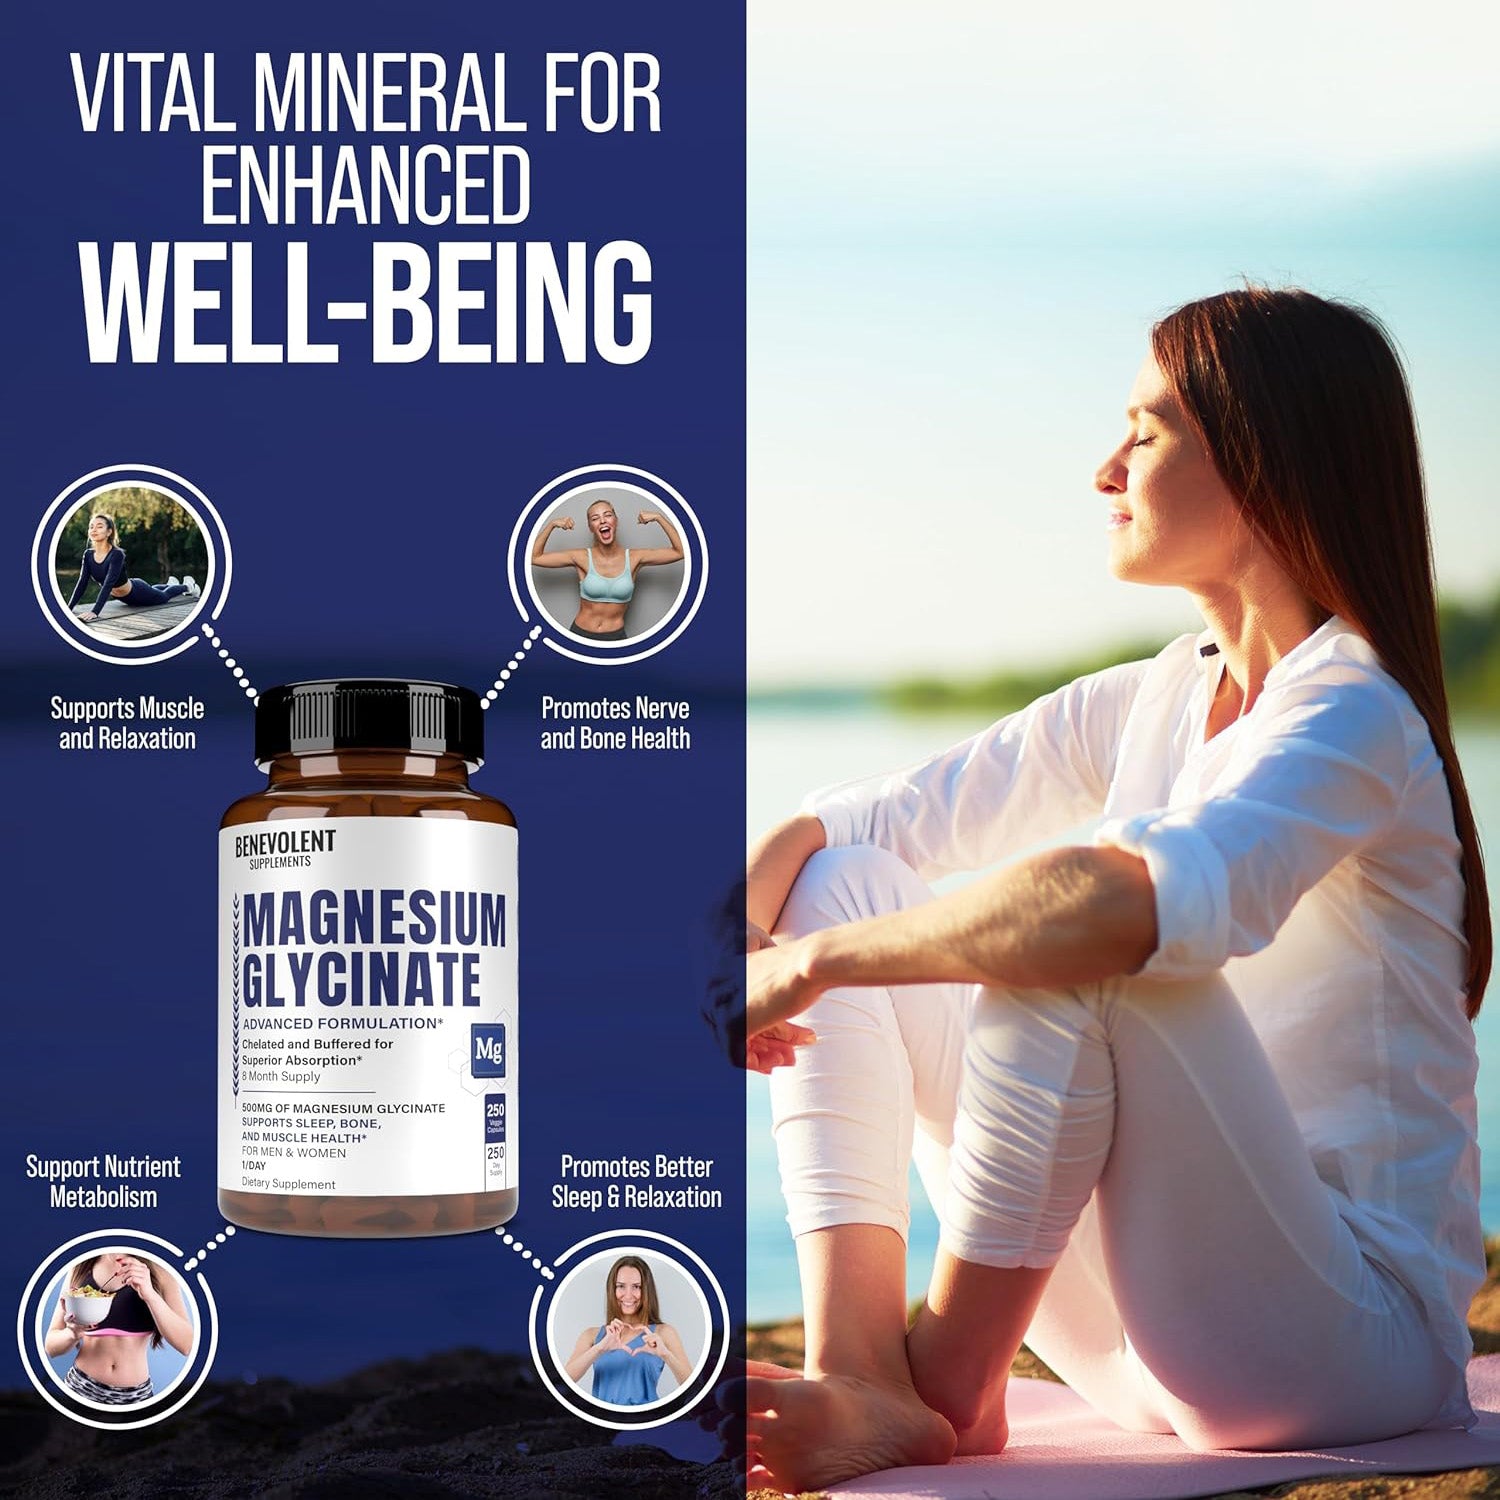 Vital mineral for enhanced wellbeing